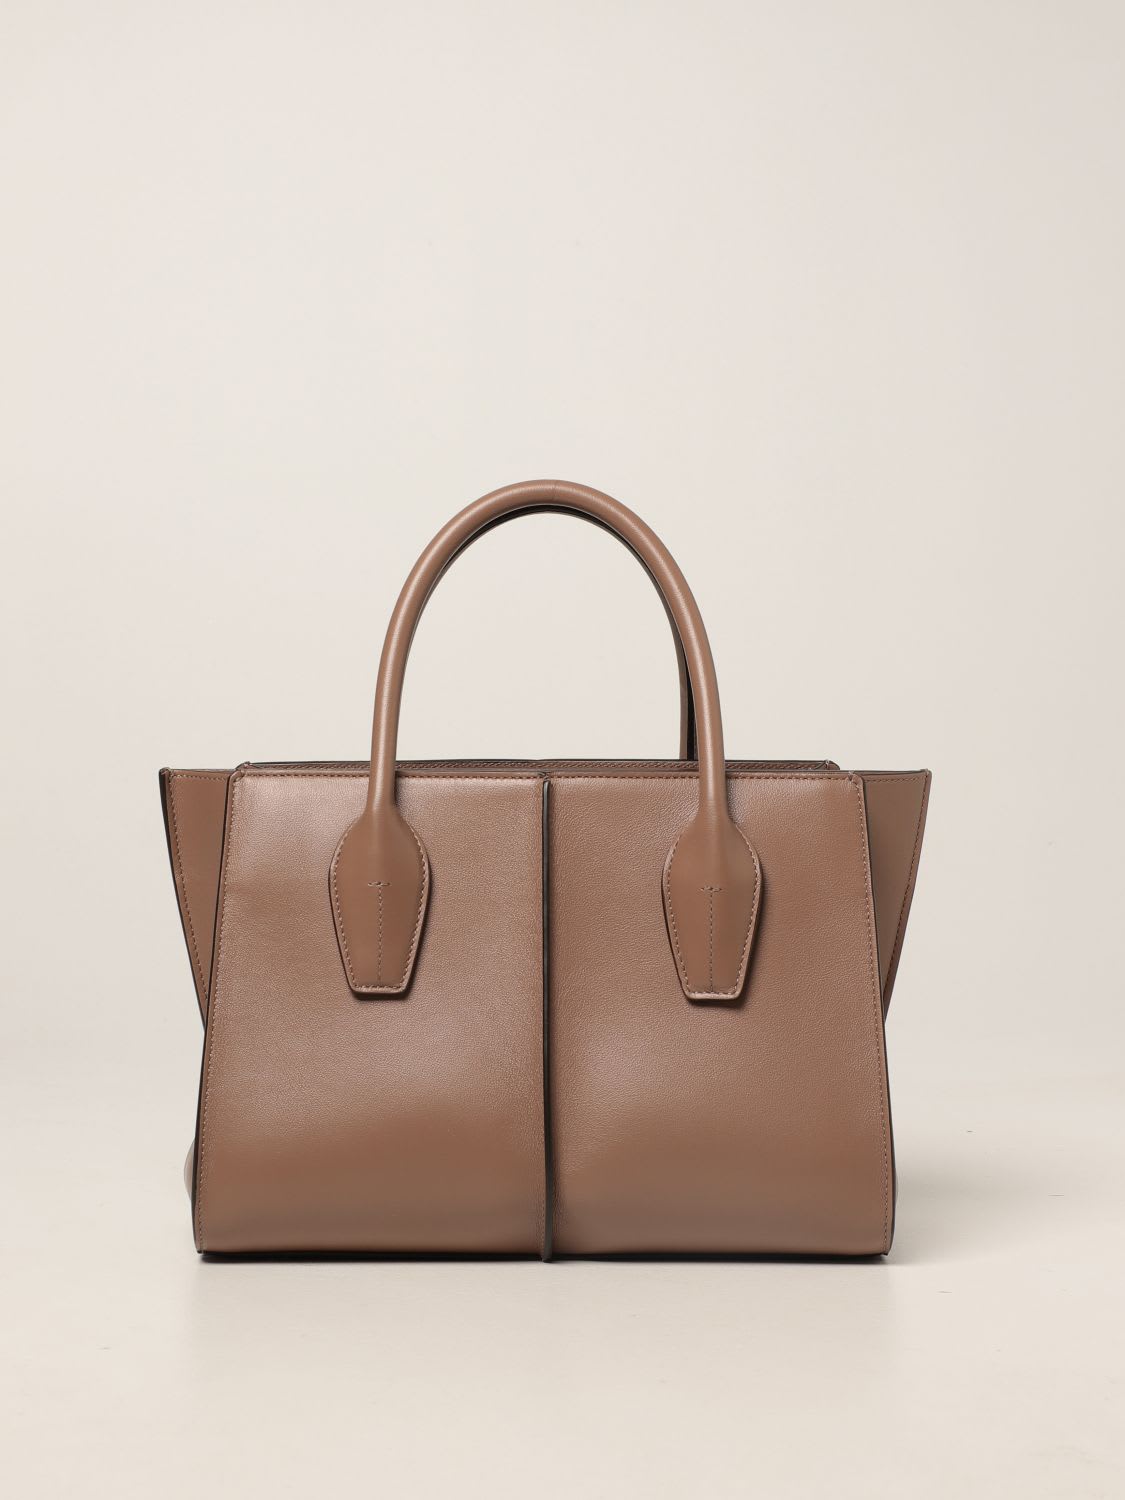 Tods Handbag Tods Holly Leather Bag